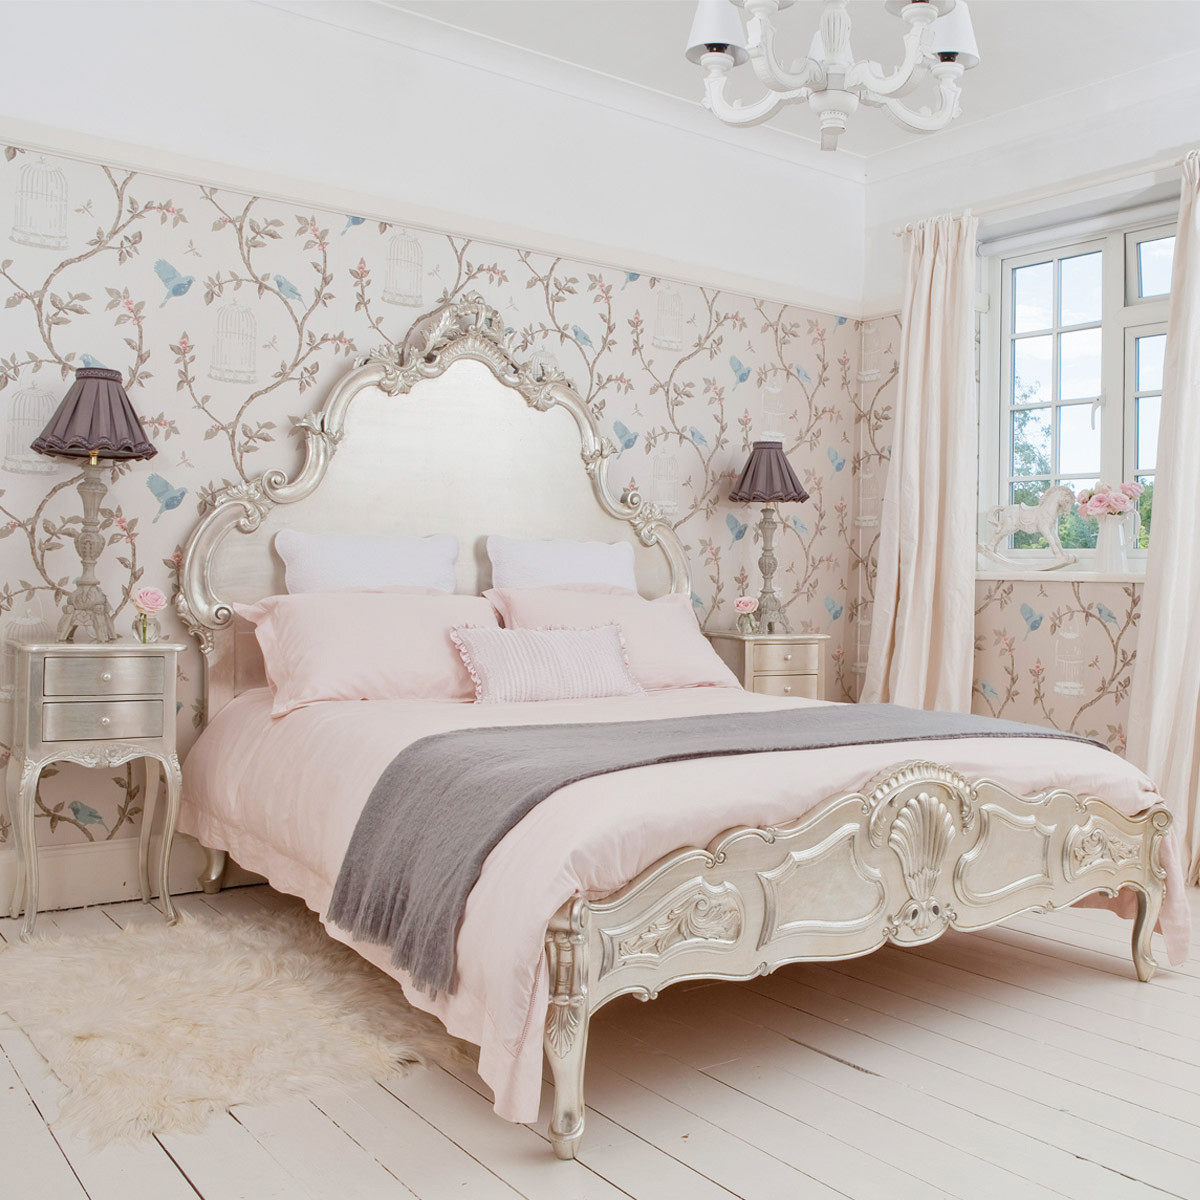 French Bedroom Decor
 French Furniture Art – French Furniture is a trend to